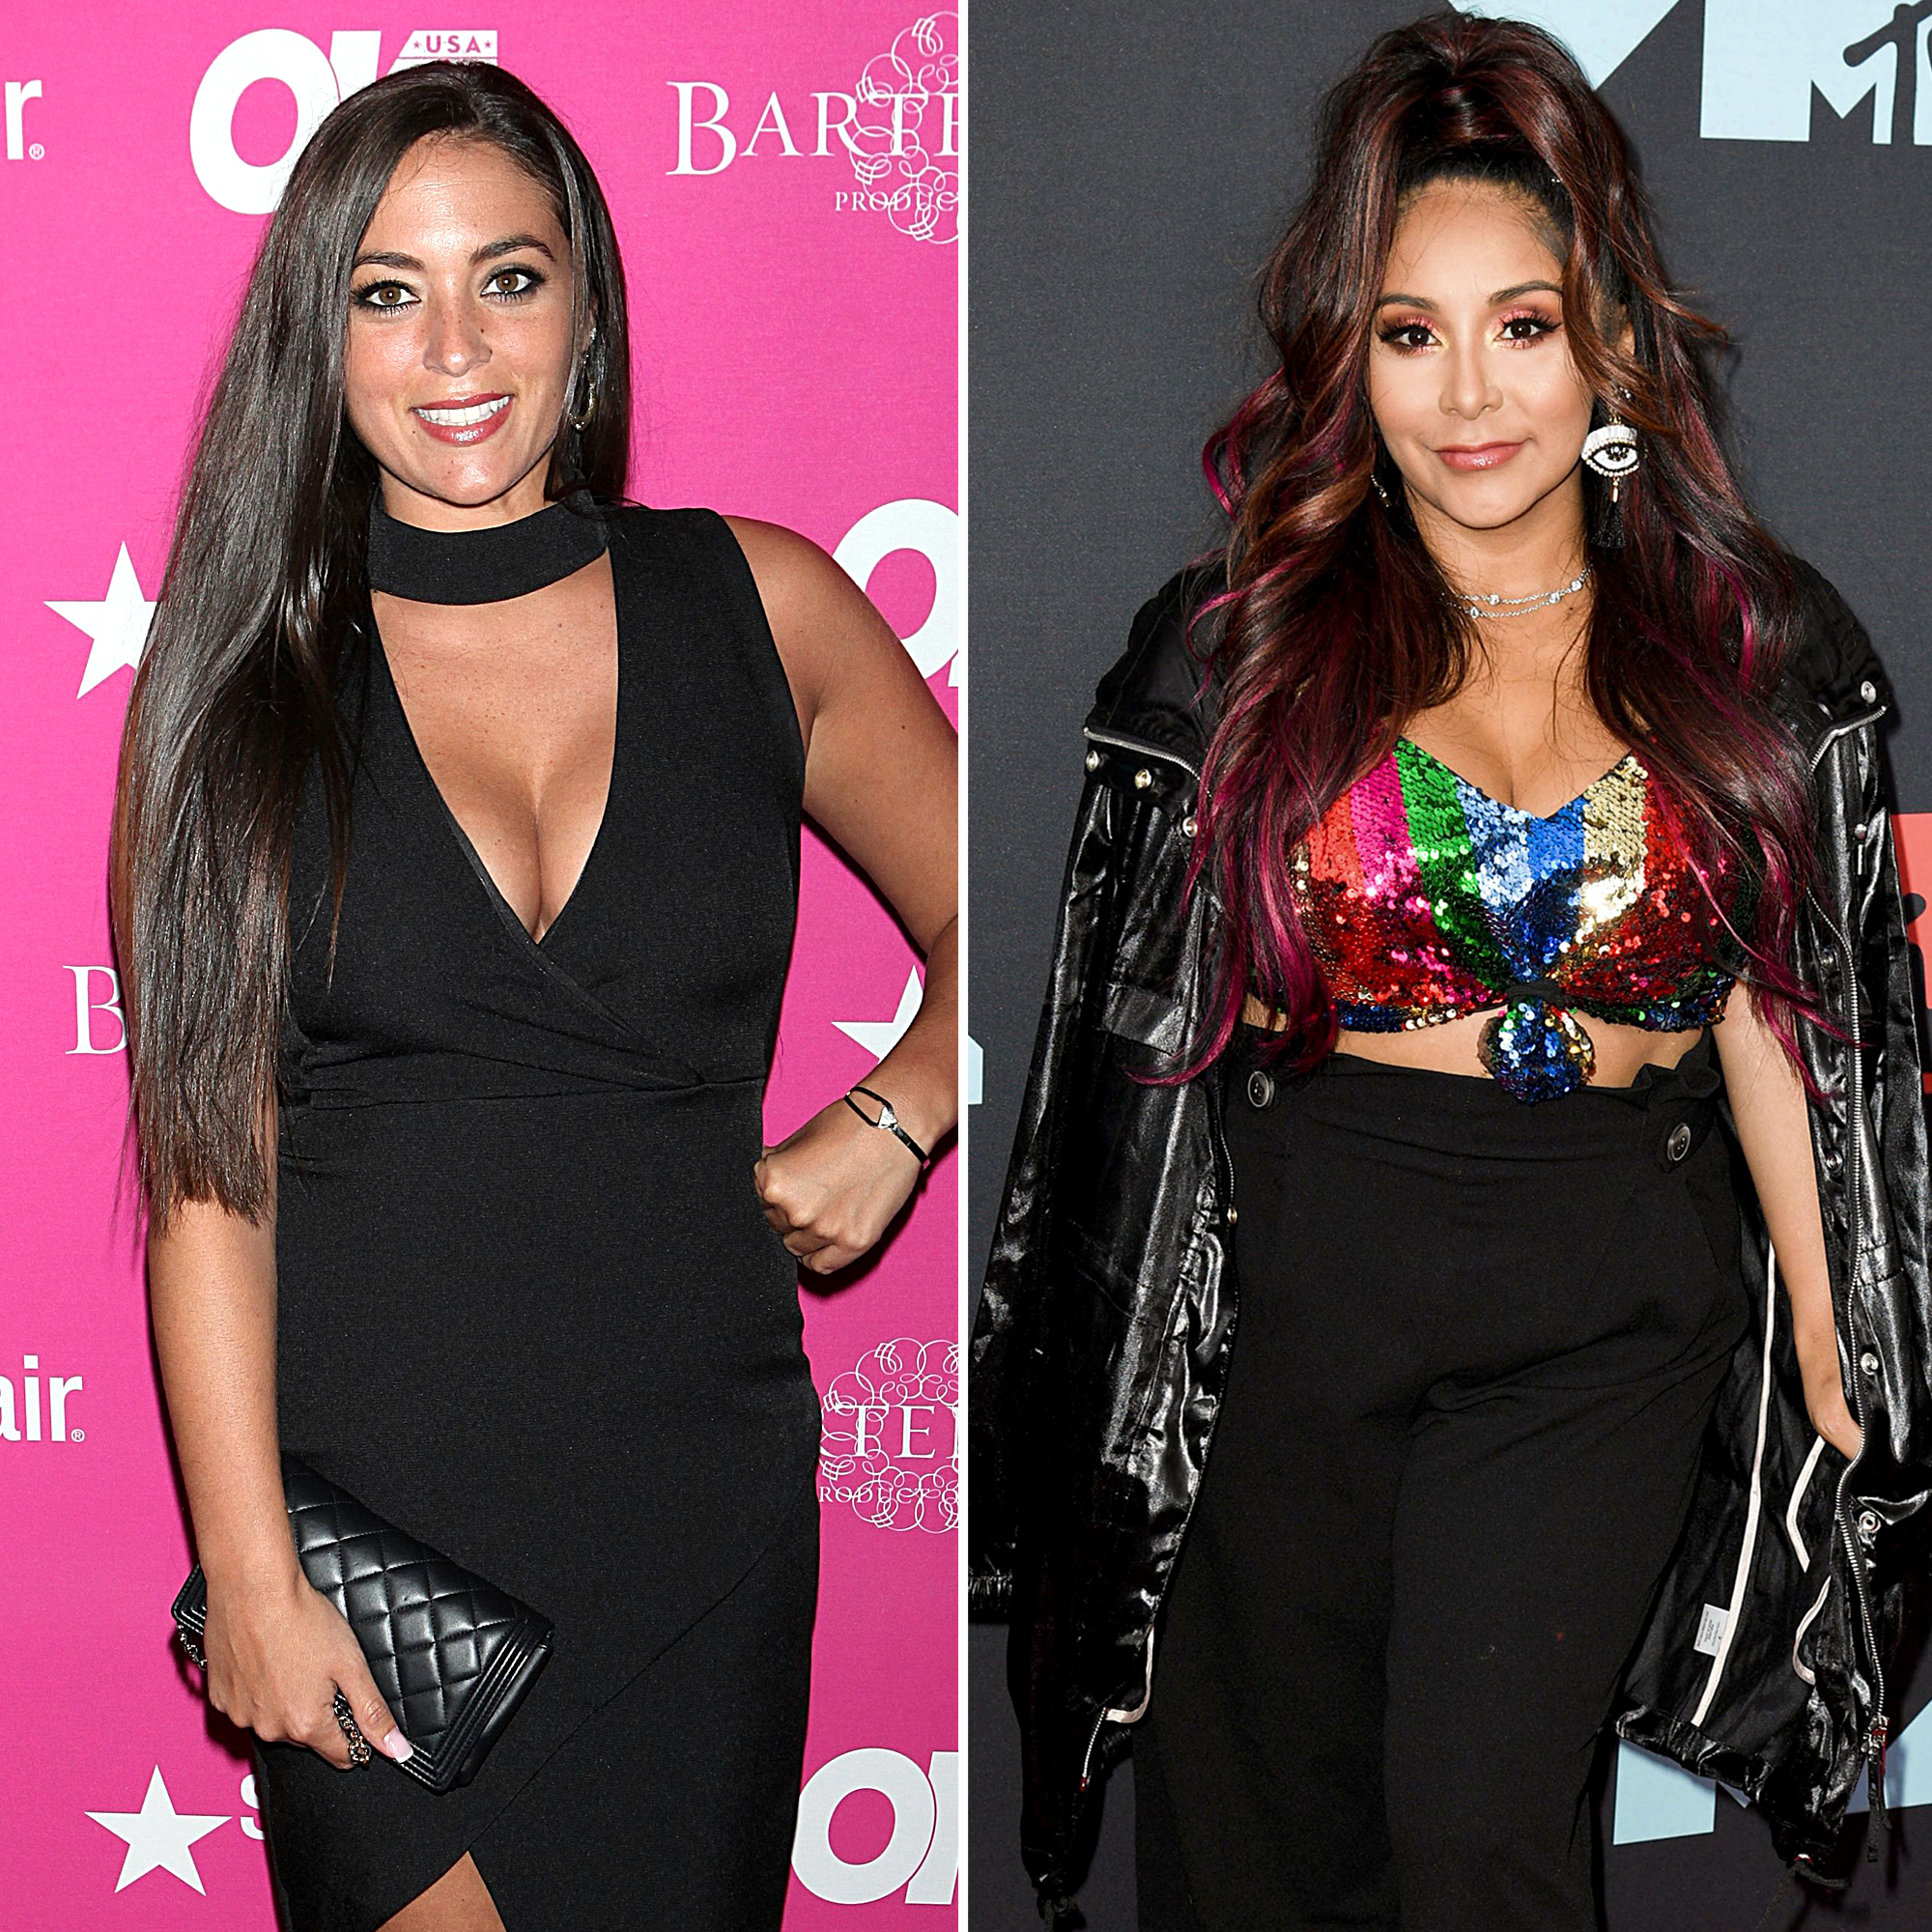 Jersey Shore's Sammi Shows Love for Snooki After Fallout